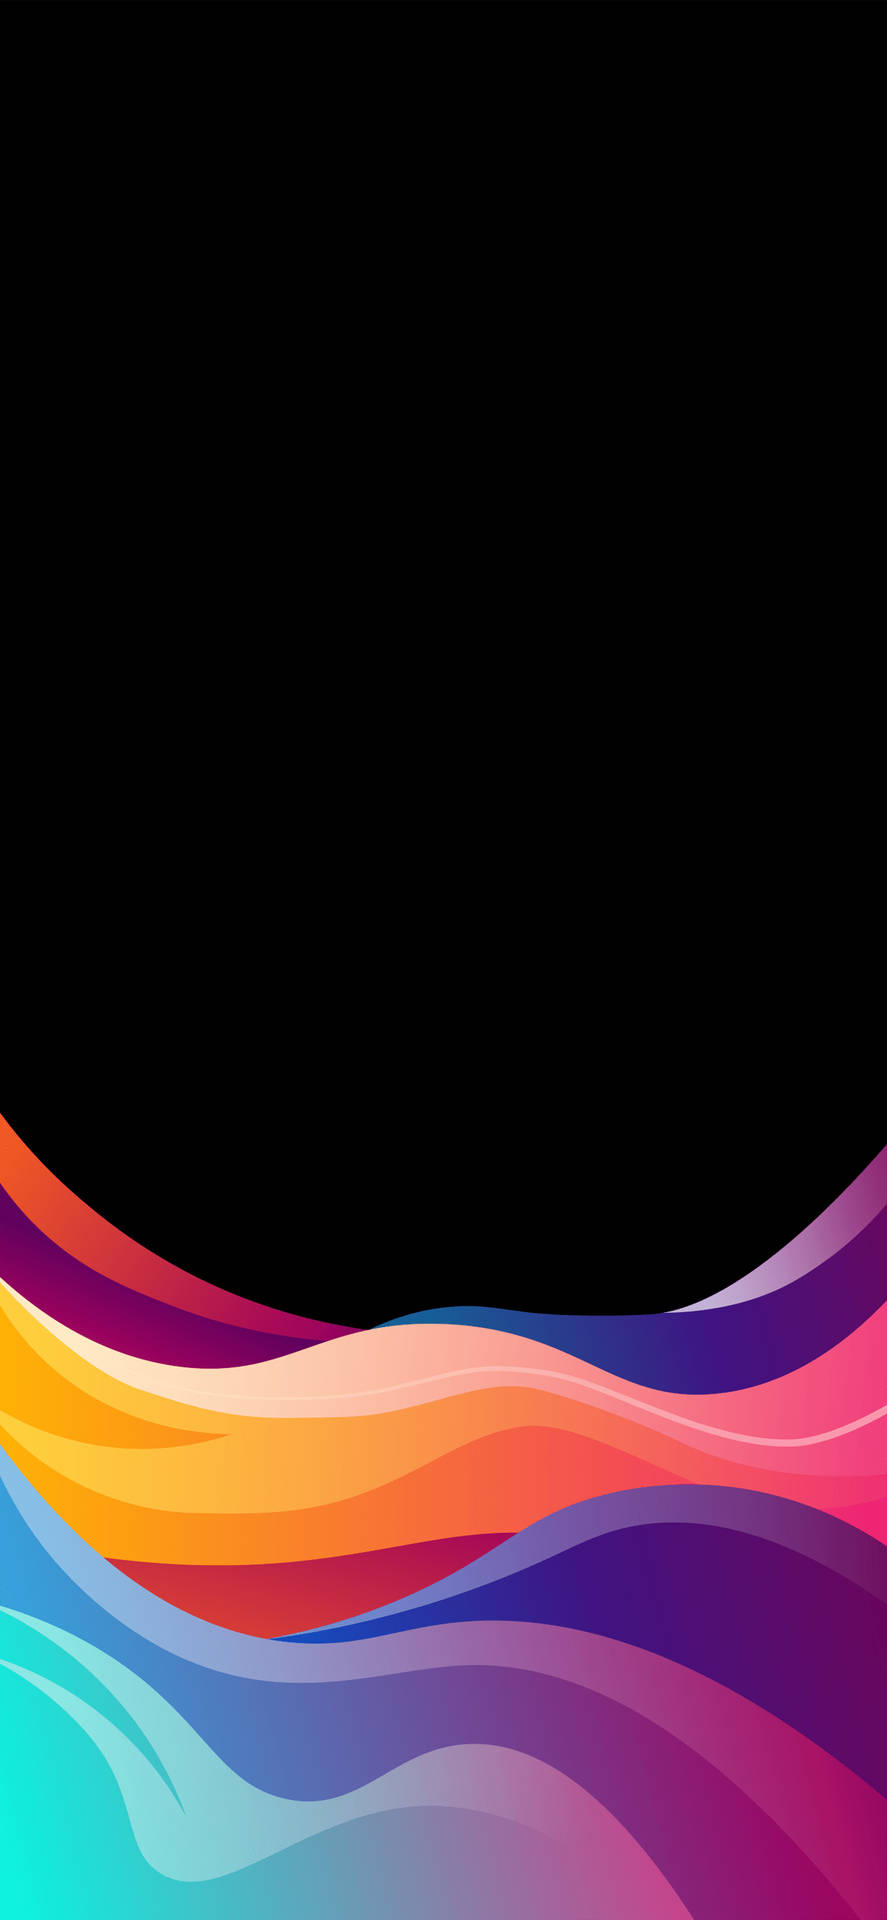 Iphone Xr Abstract Colorful Waves Wallpaper